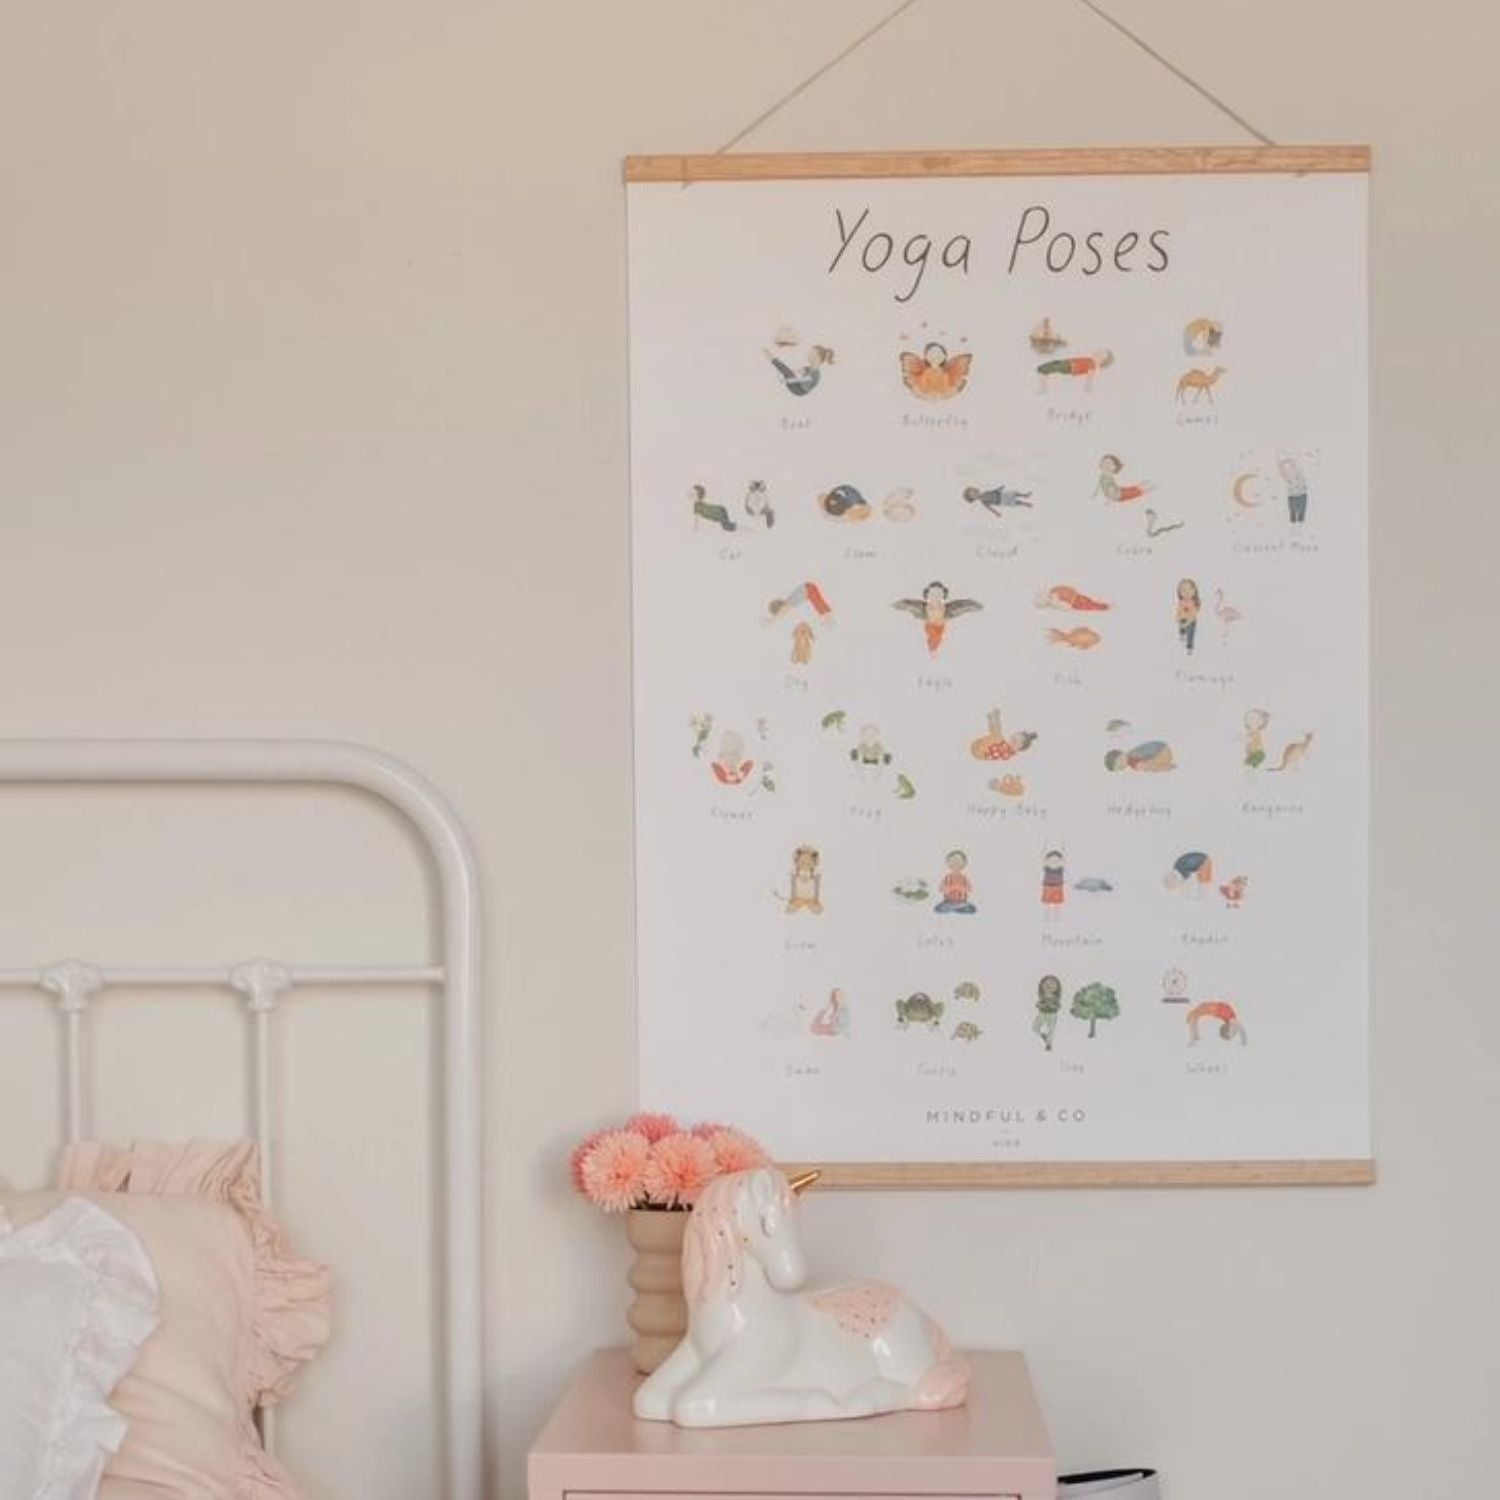 Yoga Poses Print for Children - Mindful & Co Kids